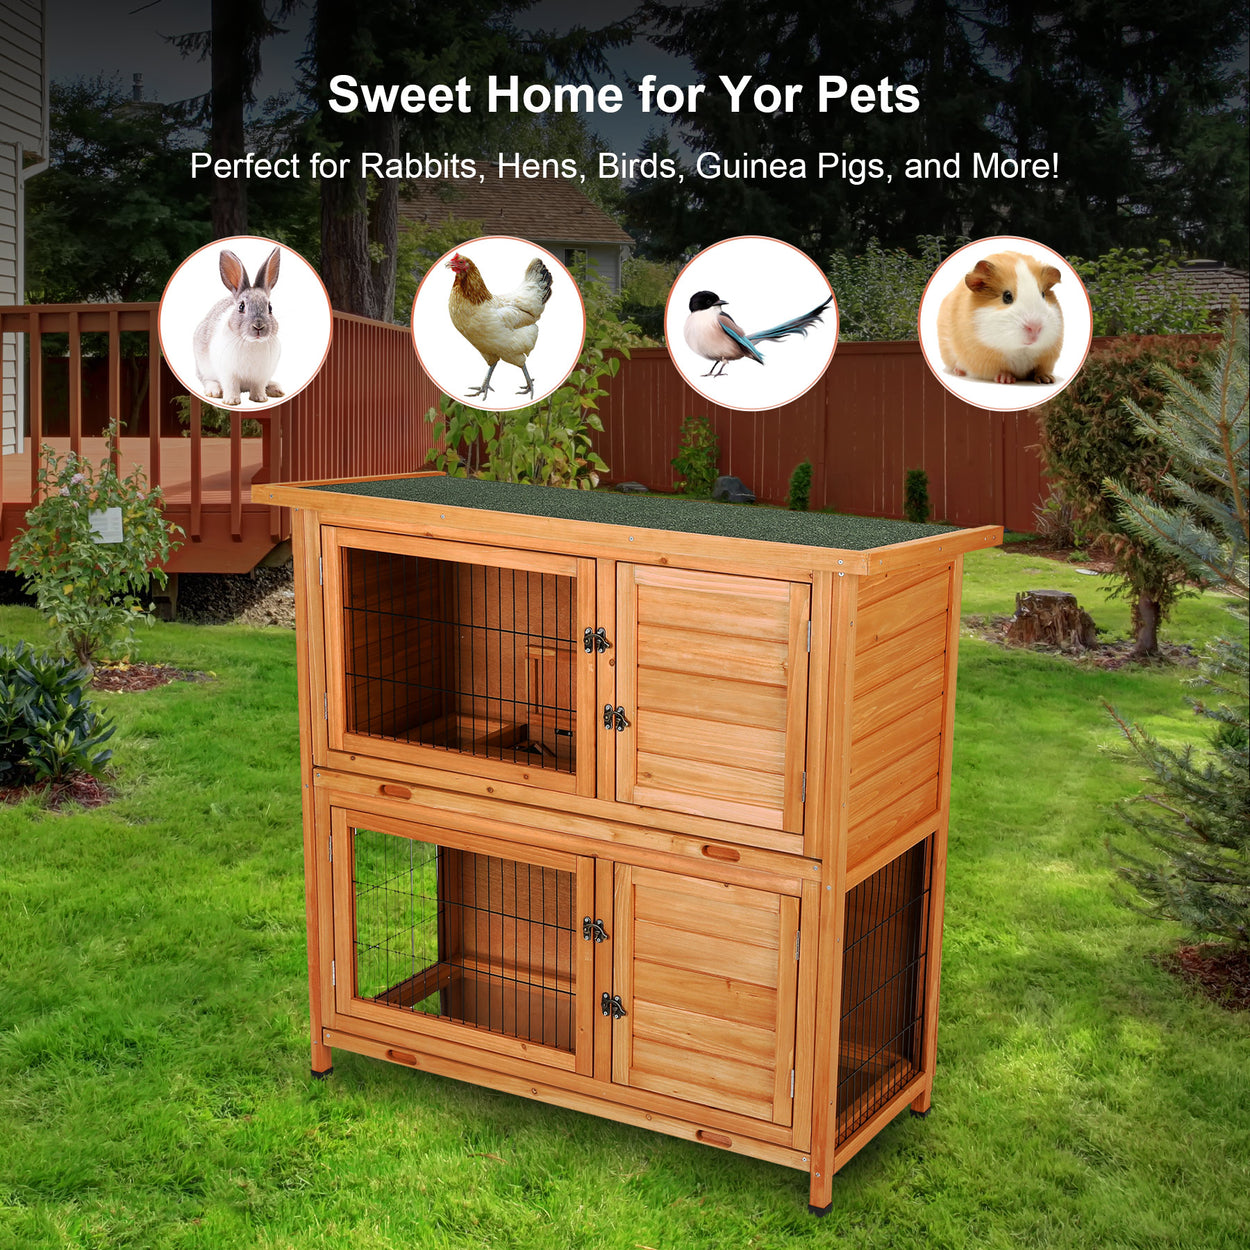 Clearance 2-Tier Outdoor Wooden Hutch for pets